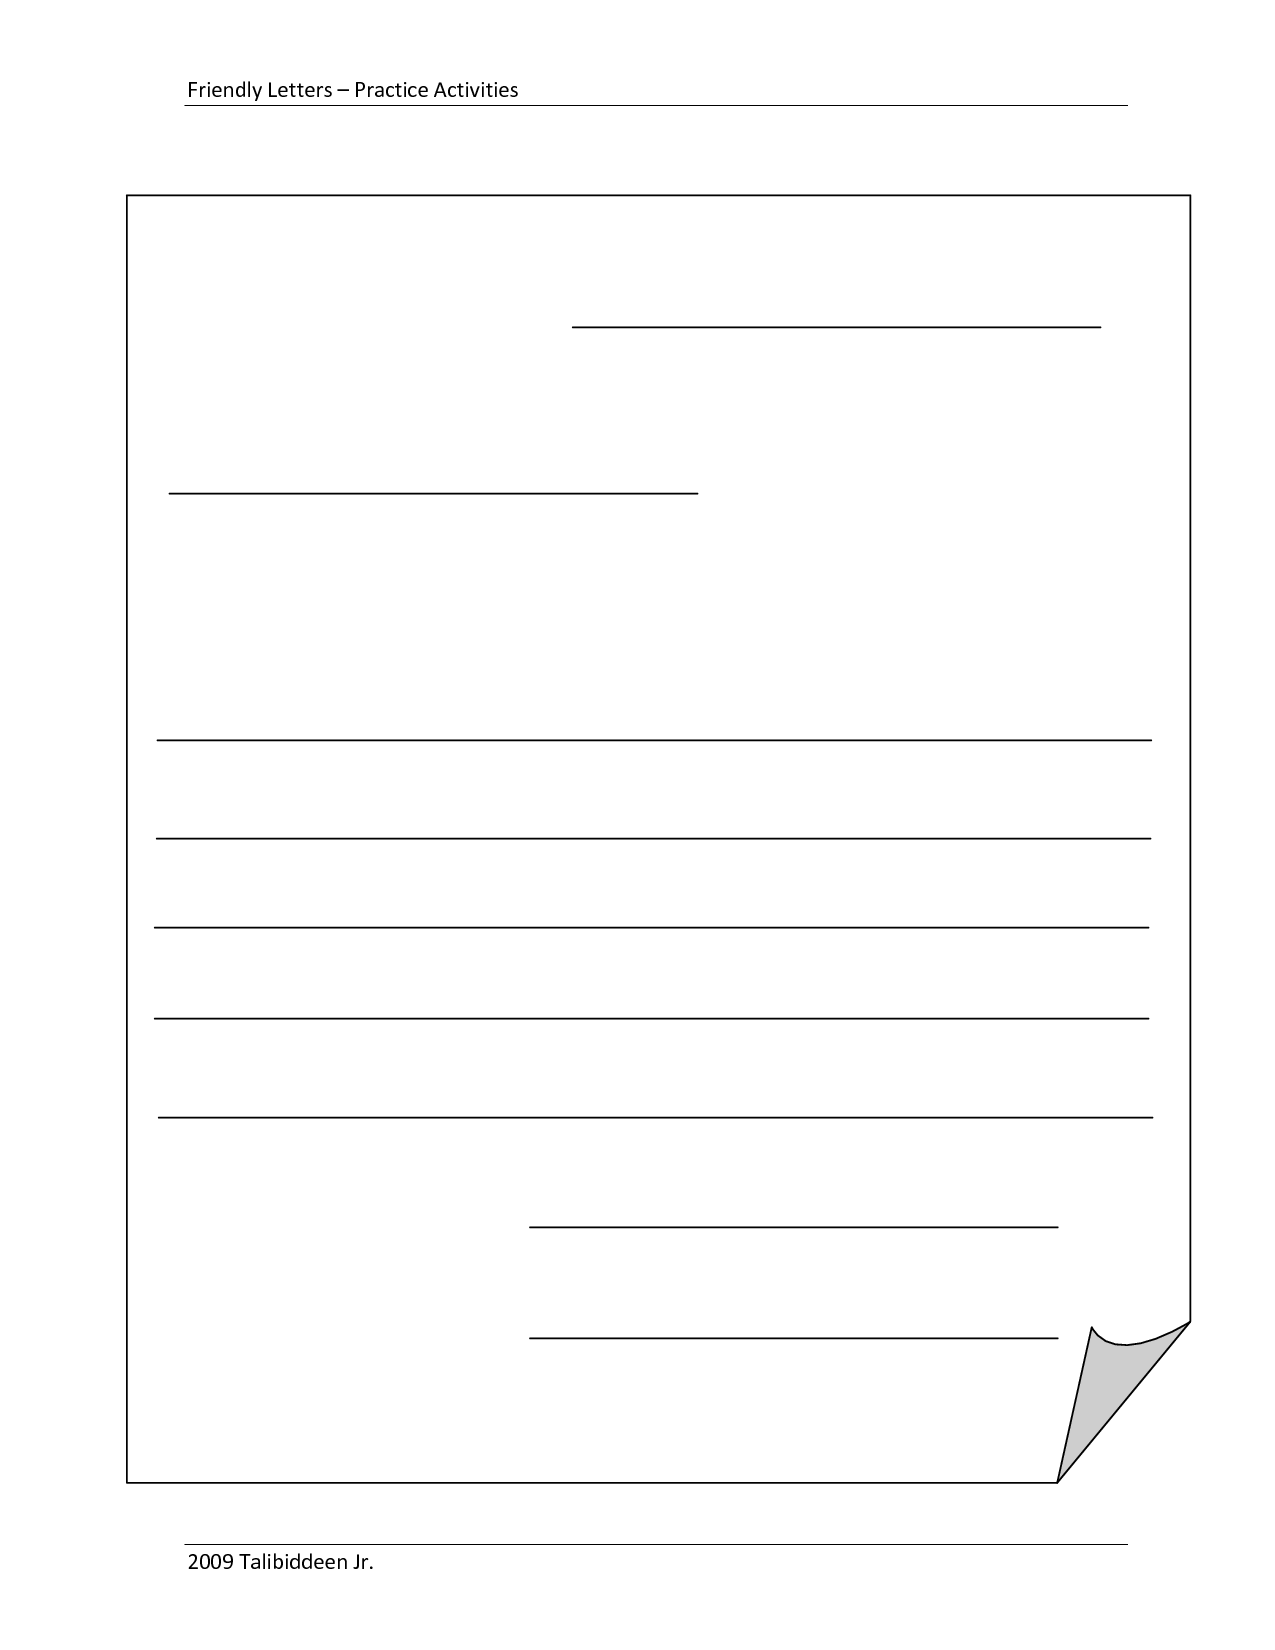 Free Printable Letter Writing Template | Writing Worksheets